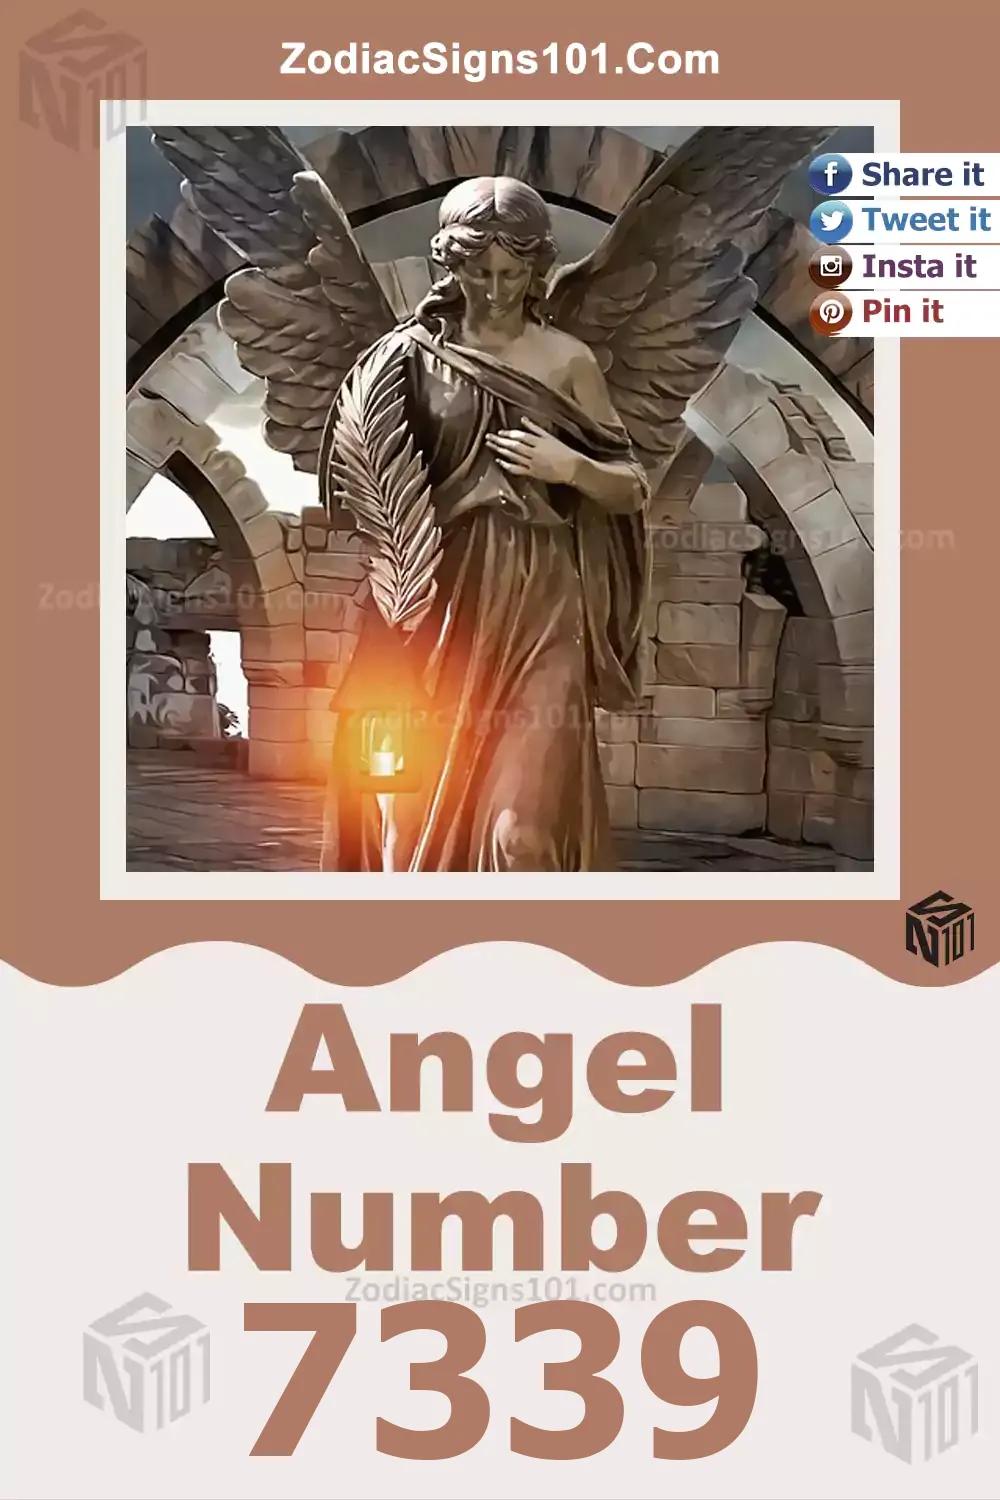 7339 Angel Number Meaning